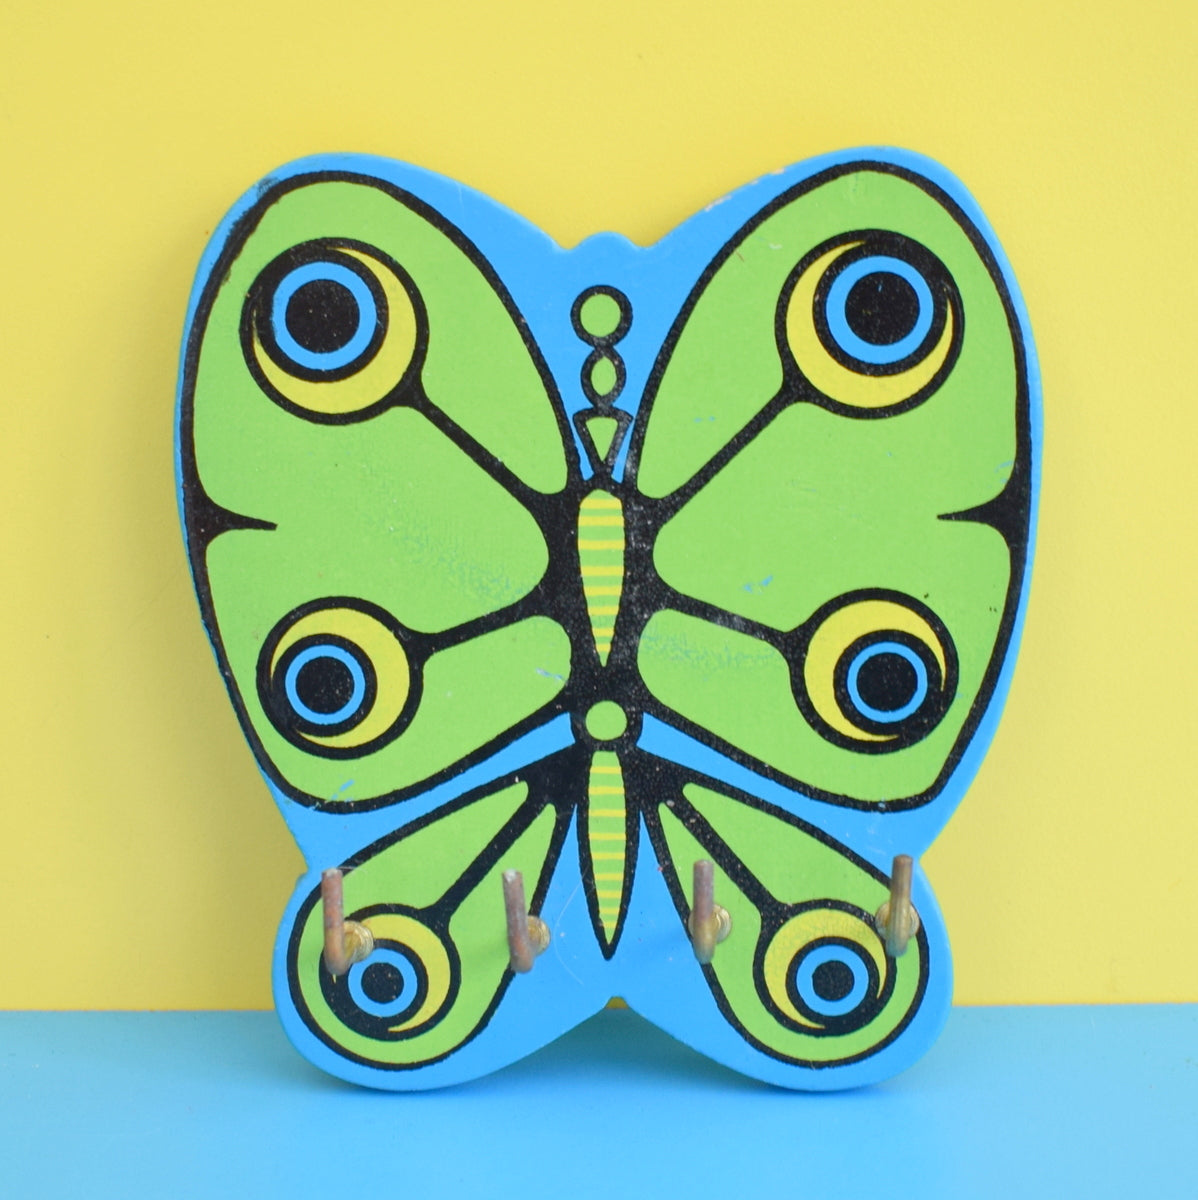 Vintage Kitsch 1960s Wooden Items - Counterpoint - Butterfly Hooks - Blue / Green